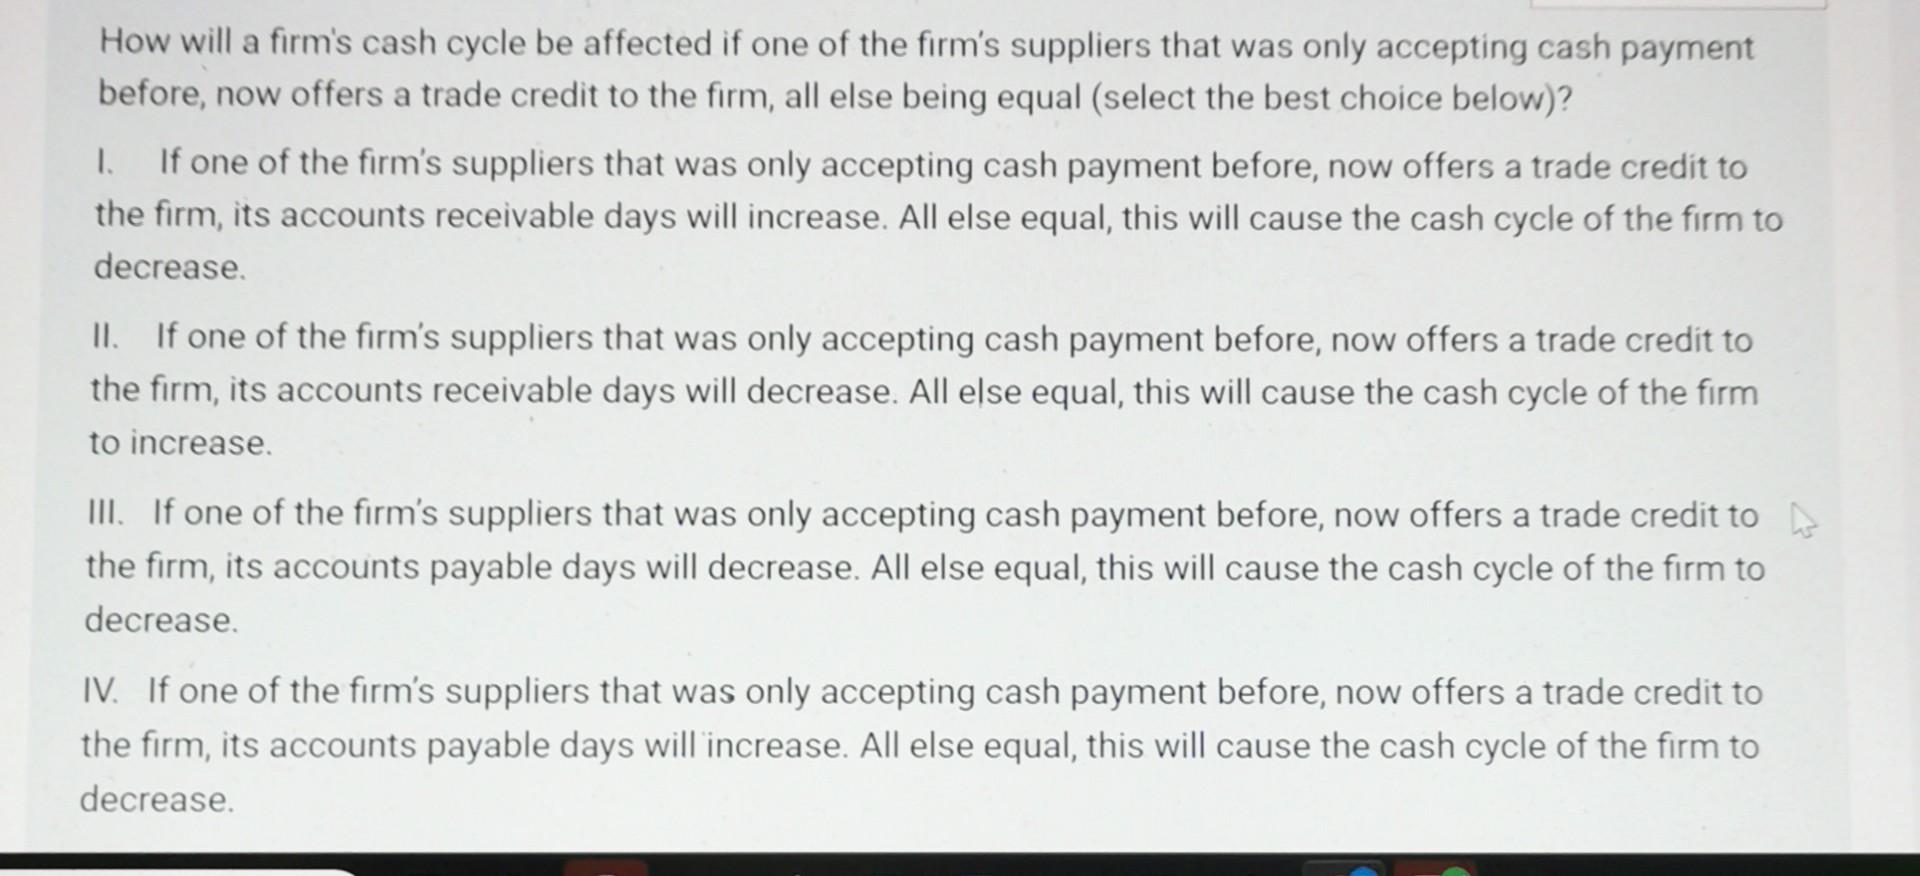 How will a firm's cash cycle be affected if one of the firm's suppliers that was only accepting cash payment